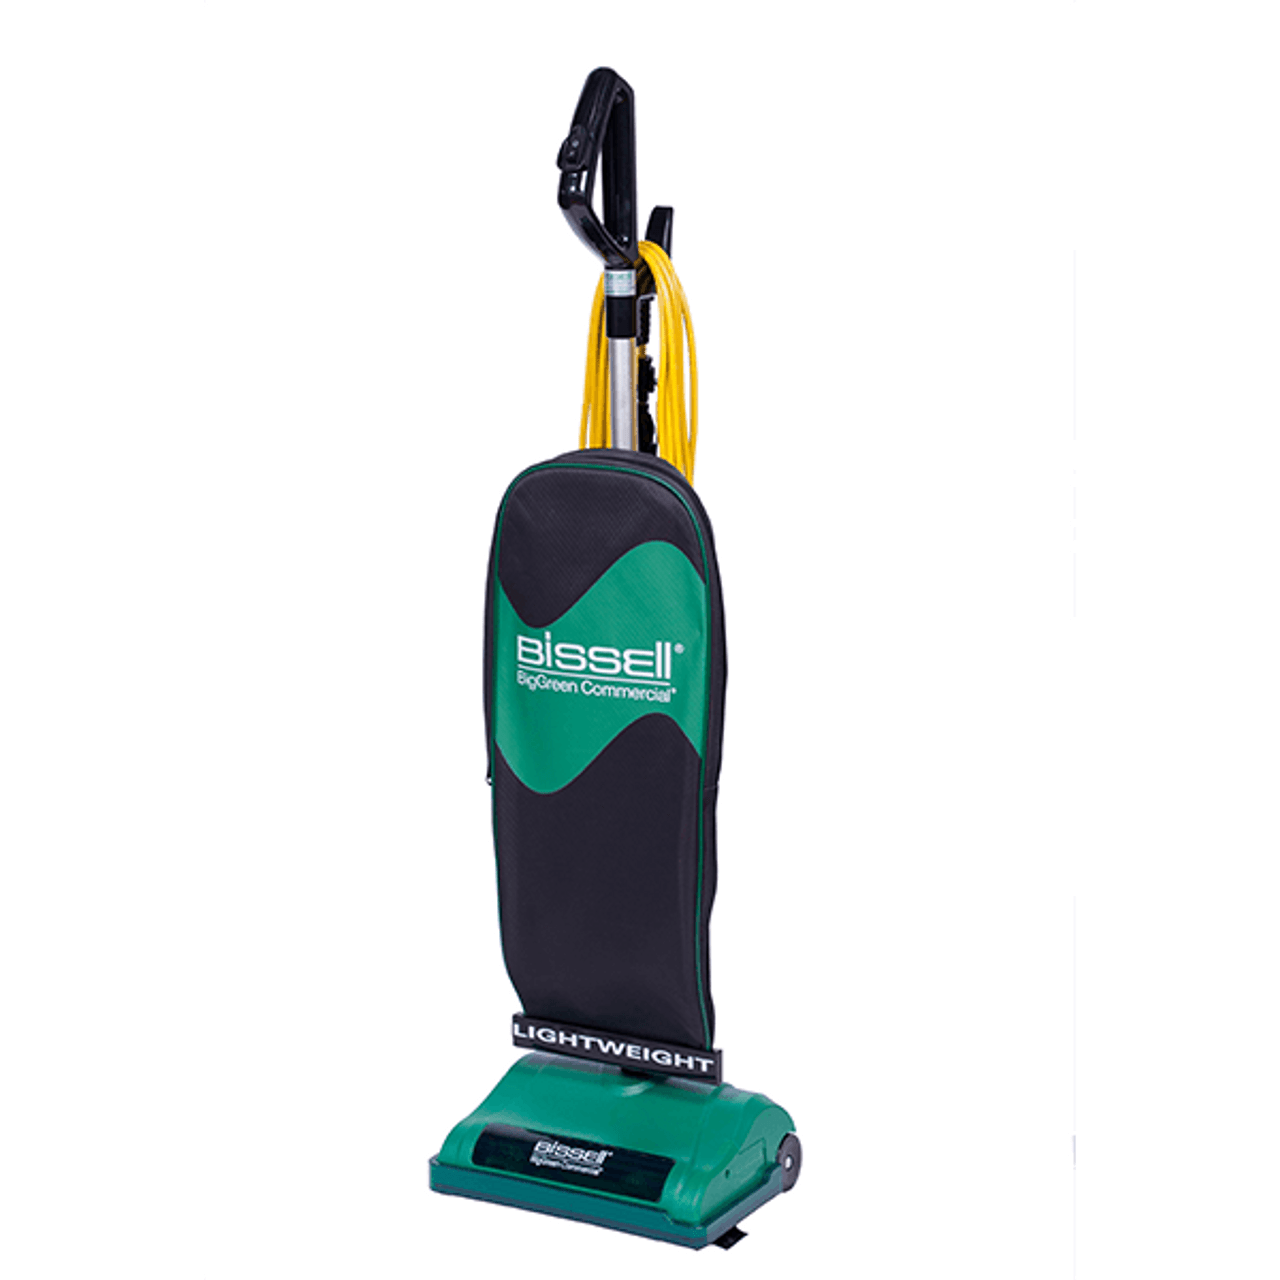 bissell Bissell Commercial 13" Lightweight Top-Fill Cloth Bagged Upright Vacuum Cleaner with Self-Adjusting Height